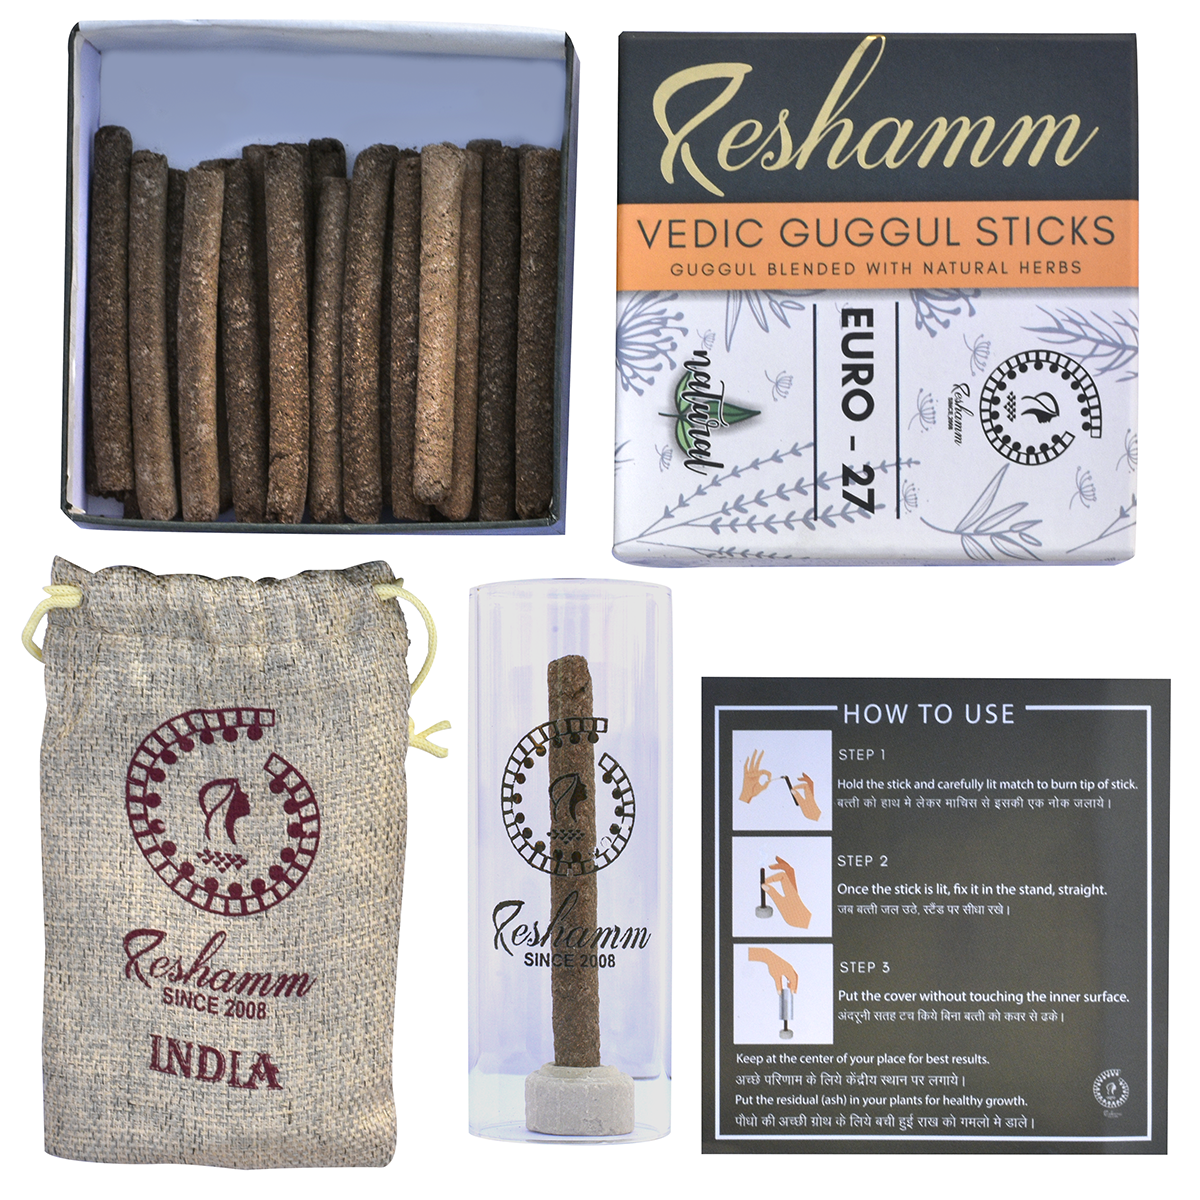 Smokeless Vedic Guggul Sticks (Euro 27) made of Guggul & 26 Natural Herbs Powder. (Lab certified No Chemical No Artificial Fragrance and No Baans/Bamboo stick). puja item. Beautiful packaging. 1 month consumption